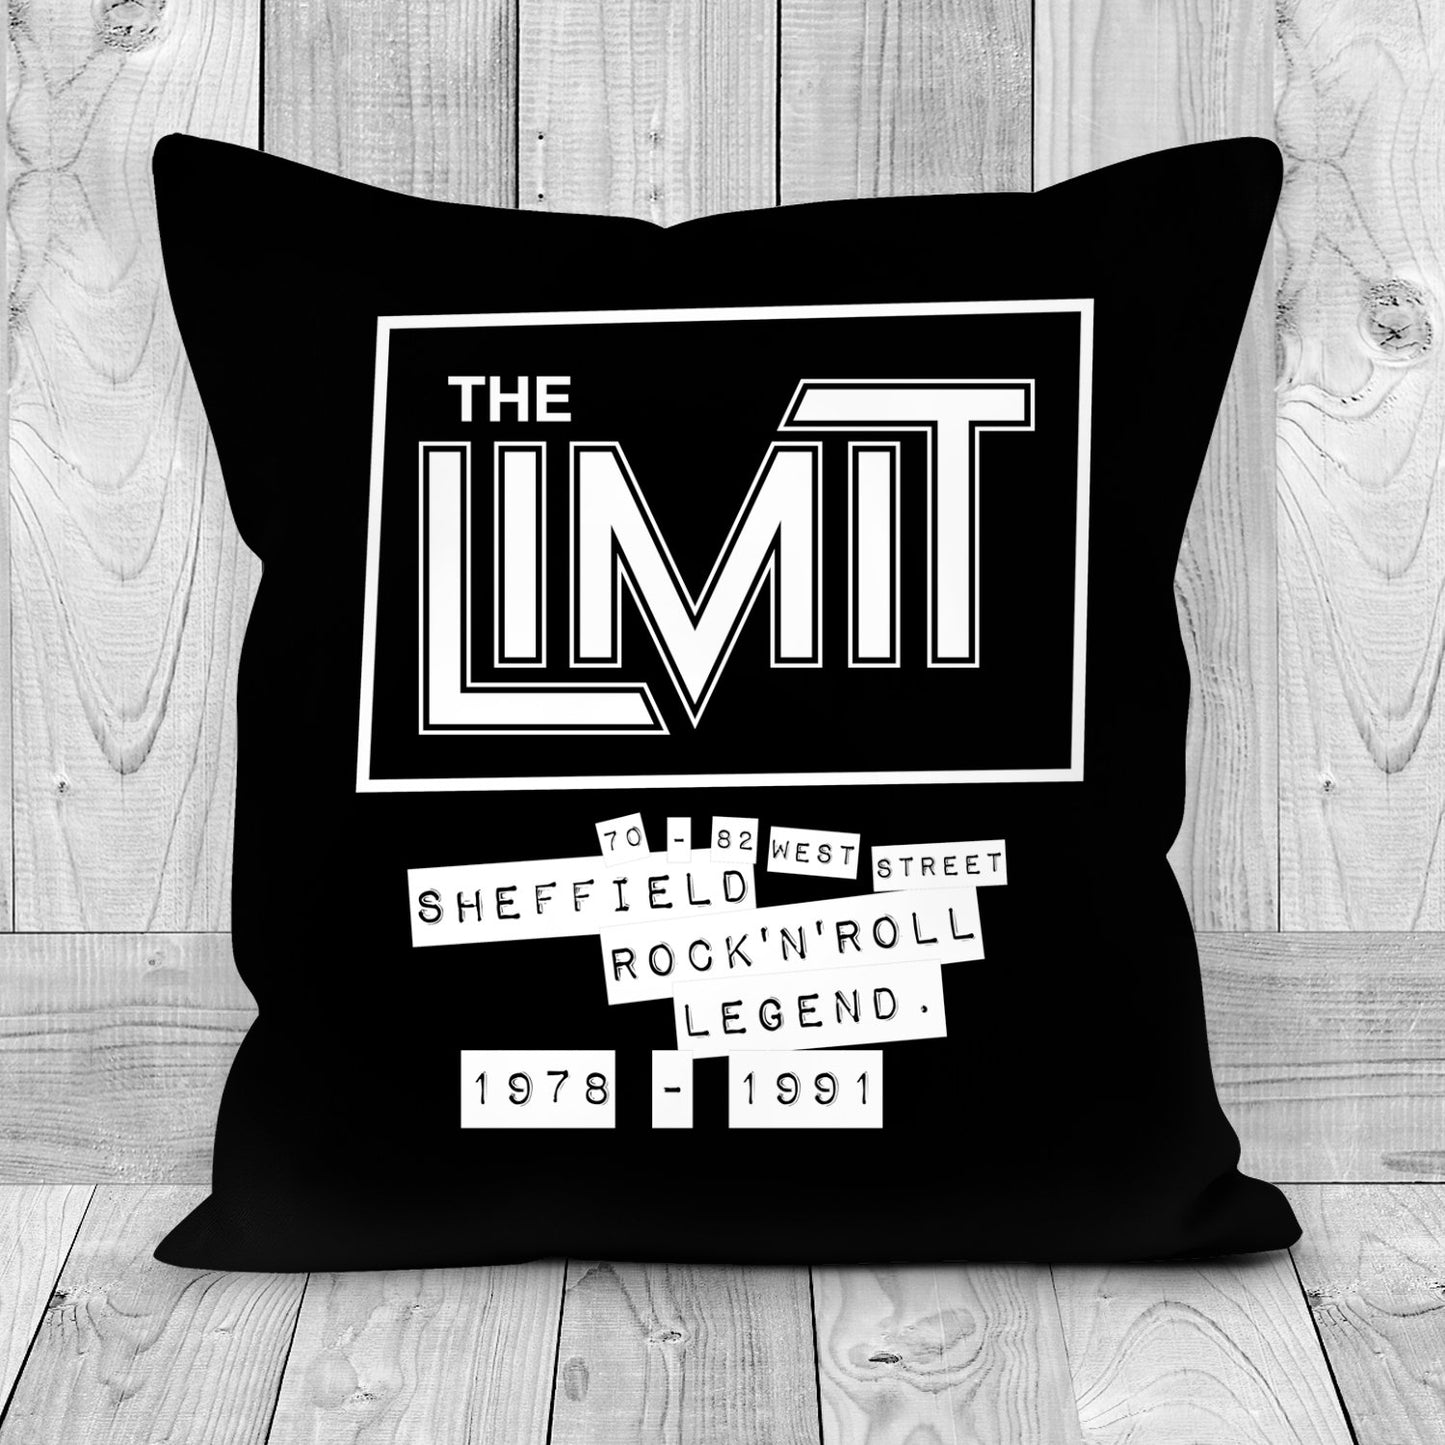 Limit - handmade cushion - Dirty Stop Outs